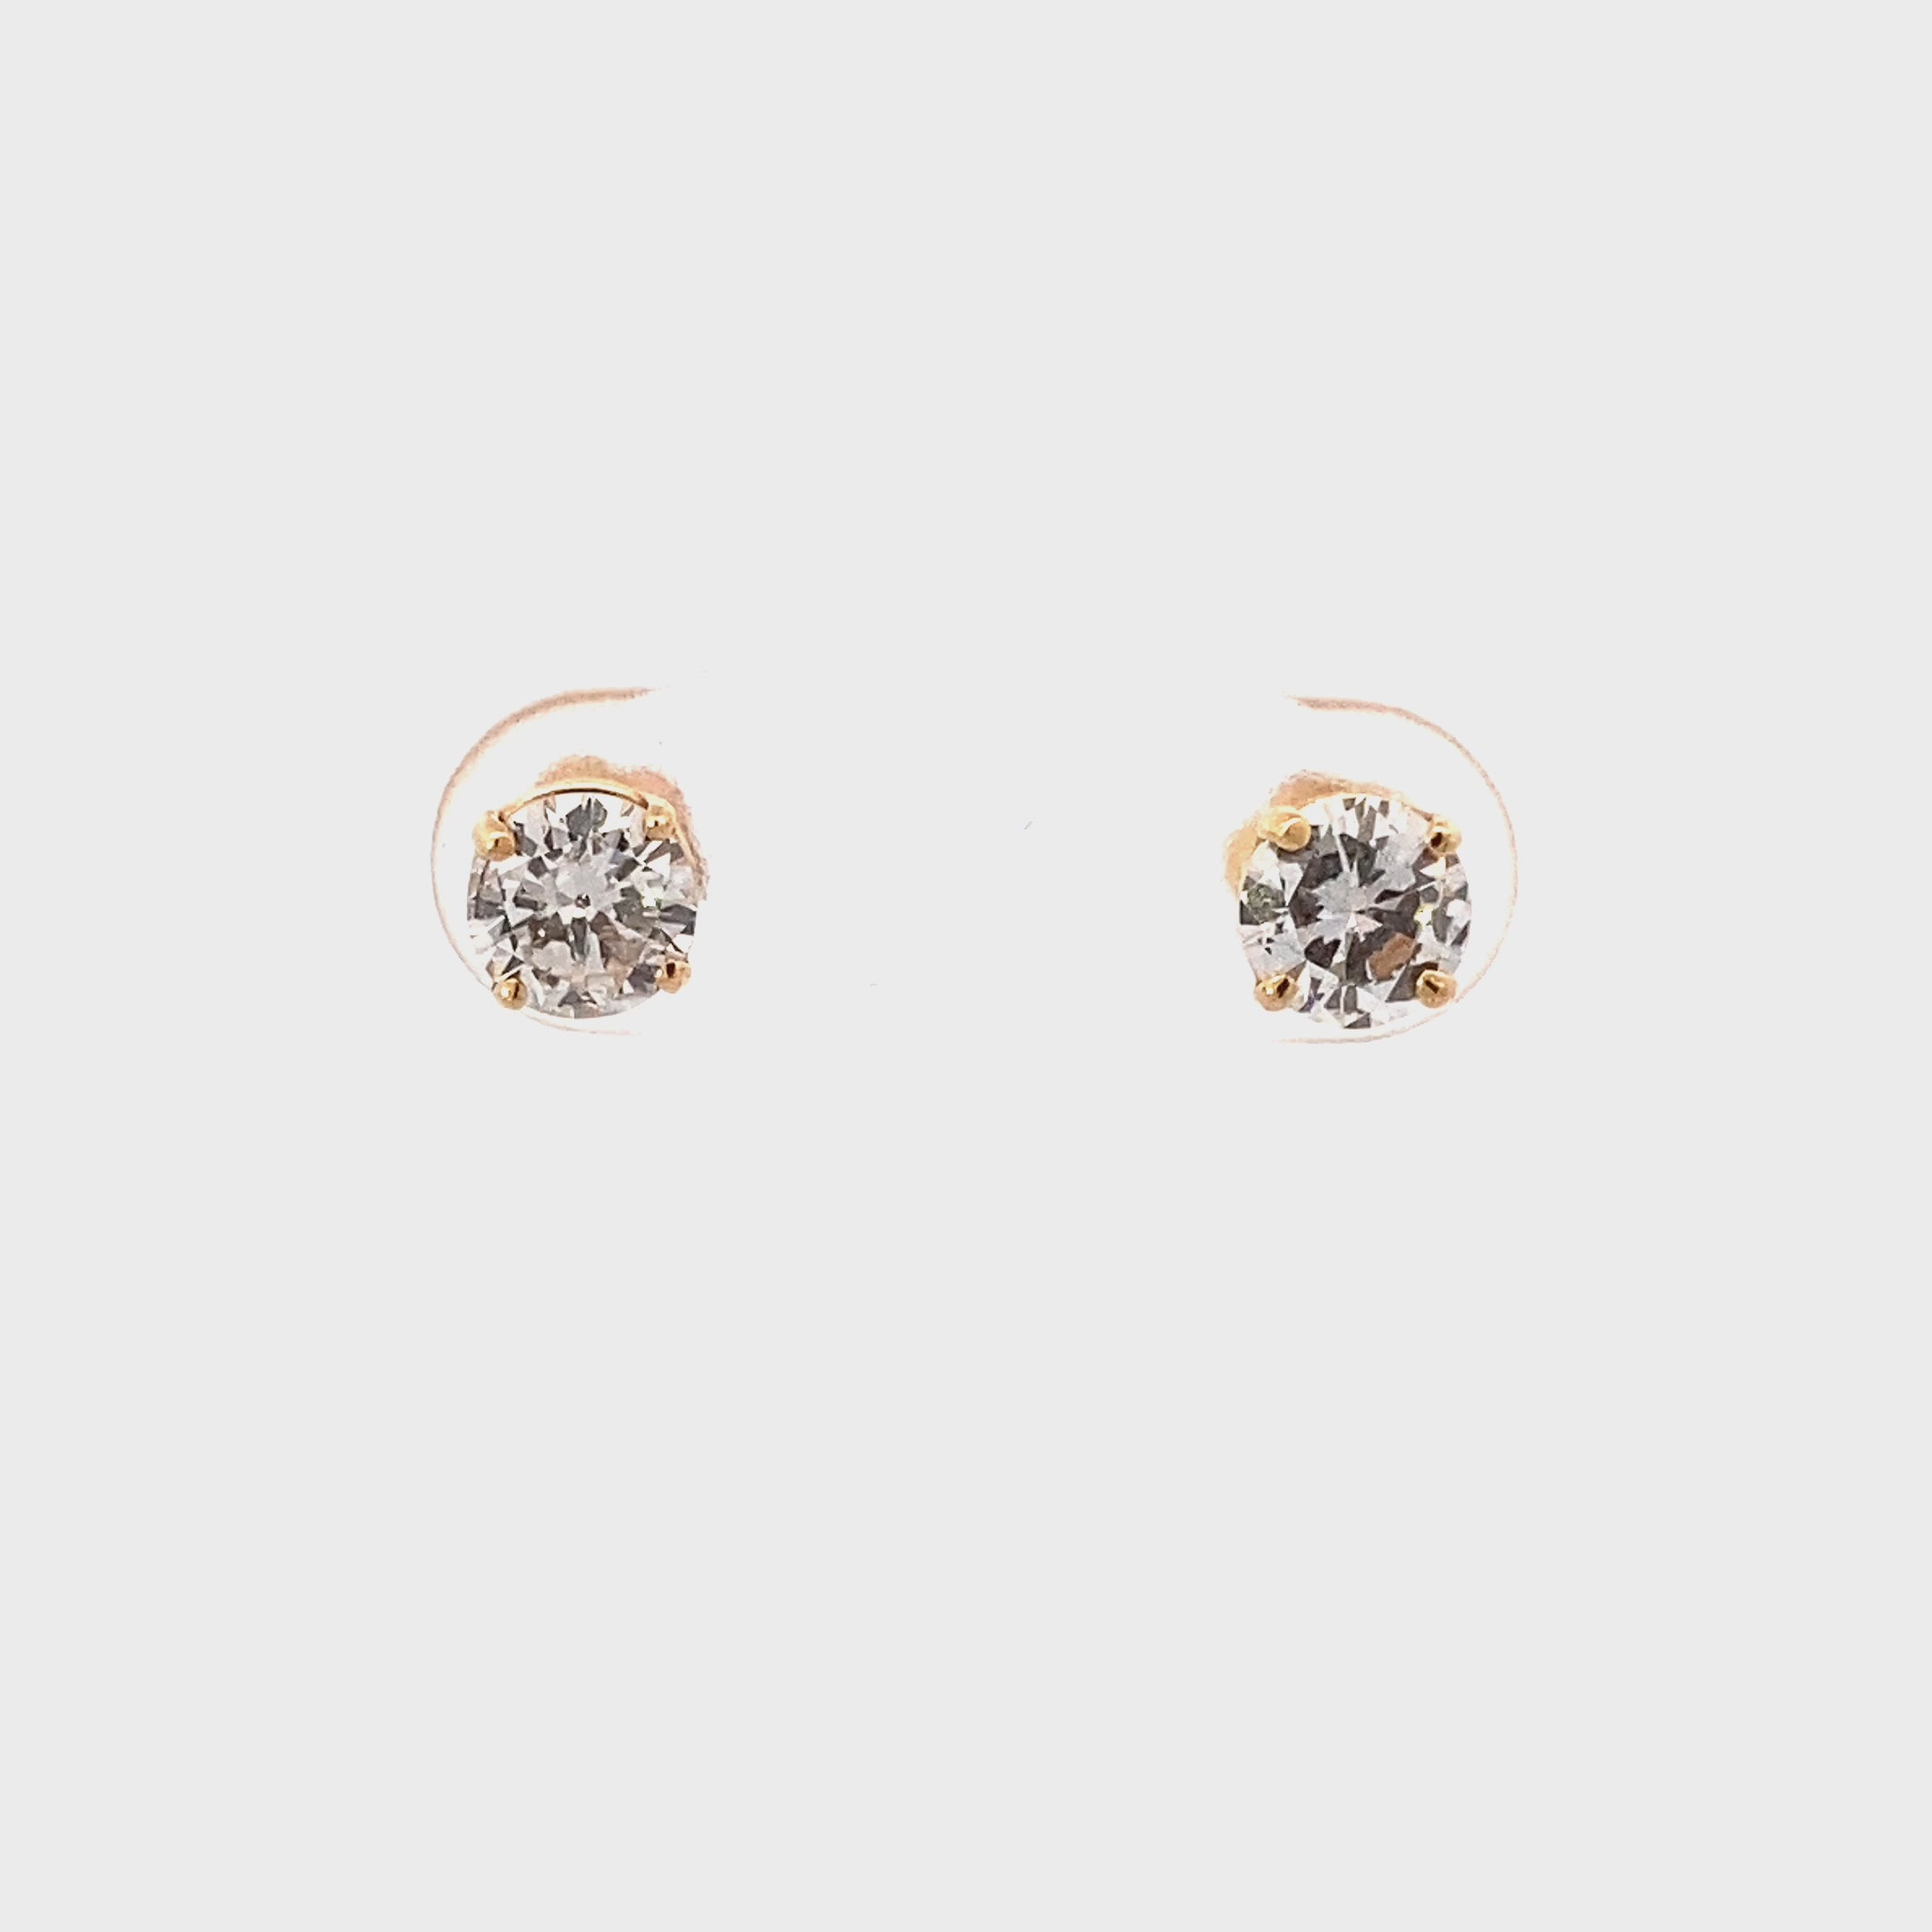 14K Yellow Gold Diamond Solitaire Earrings - 1.01ct